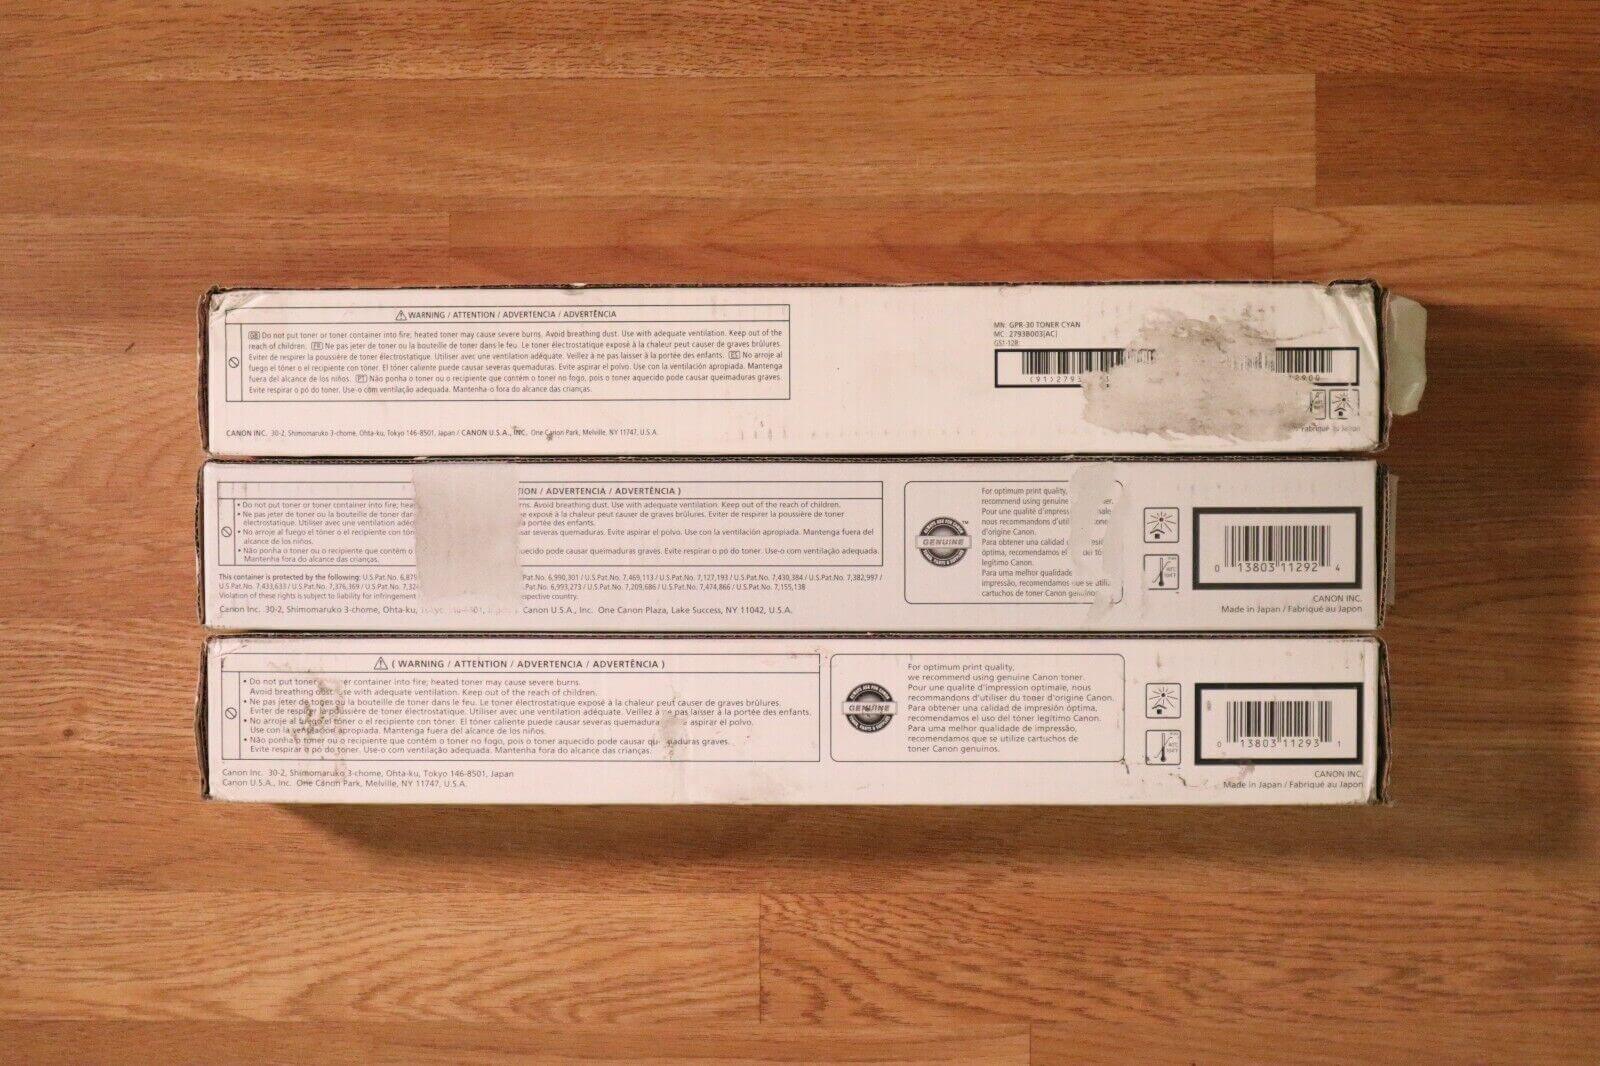 Lot of 3 Canon GPR-30 CMY Toner Set For iR ADV C5045/C5051/C5250/C5255 Same Day! - copier-clearance-center